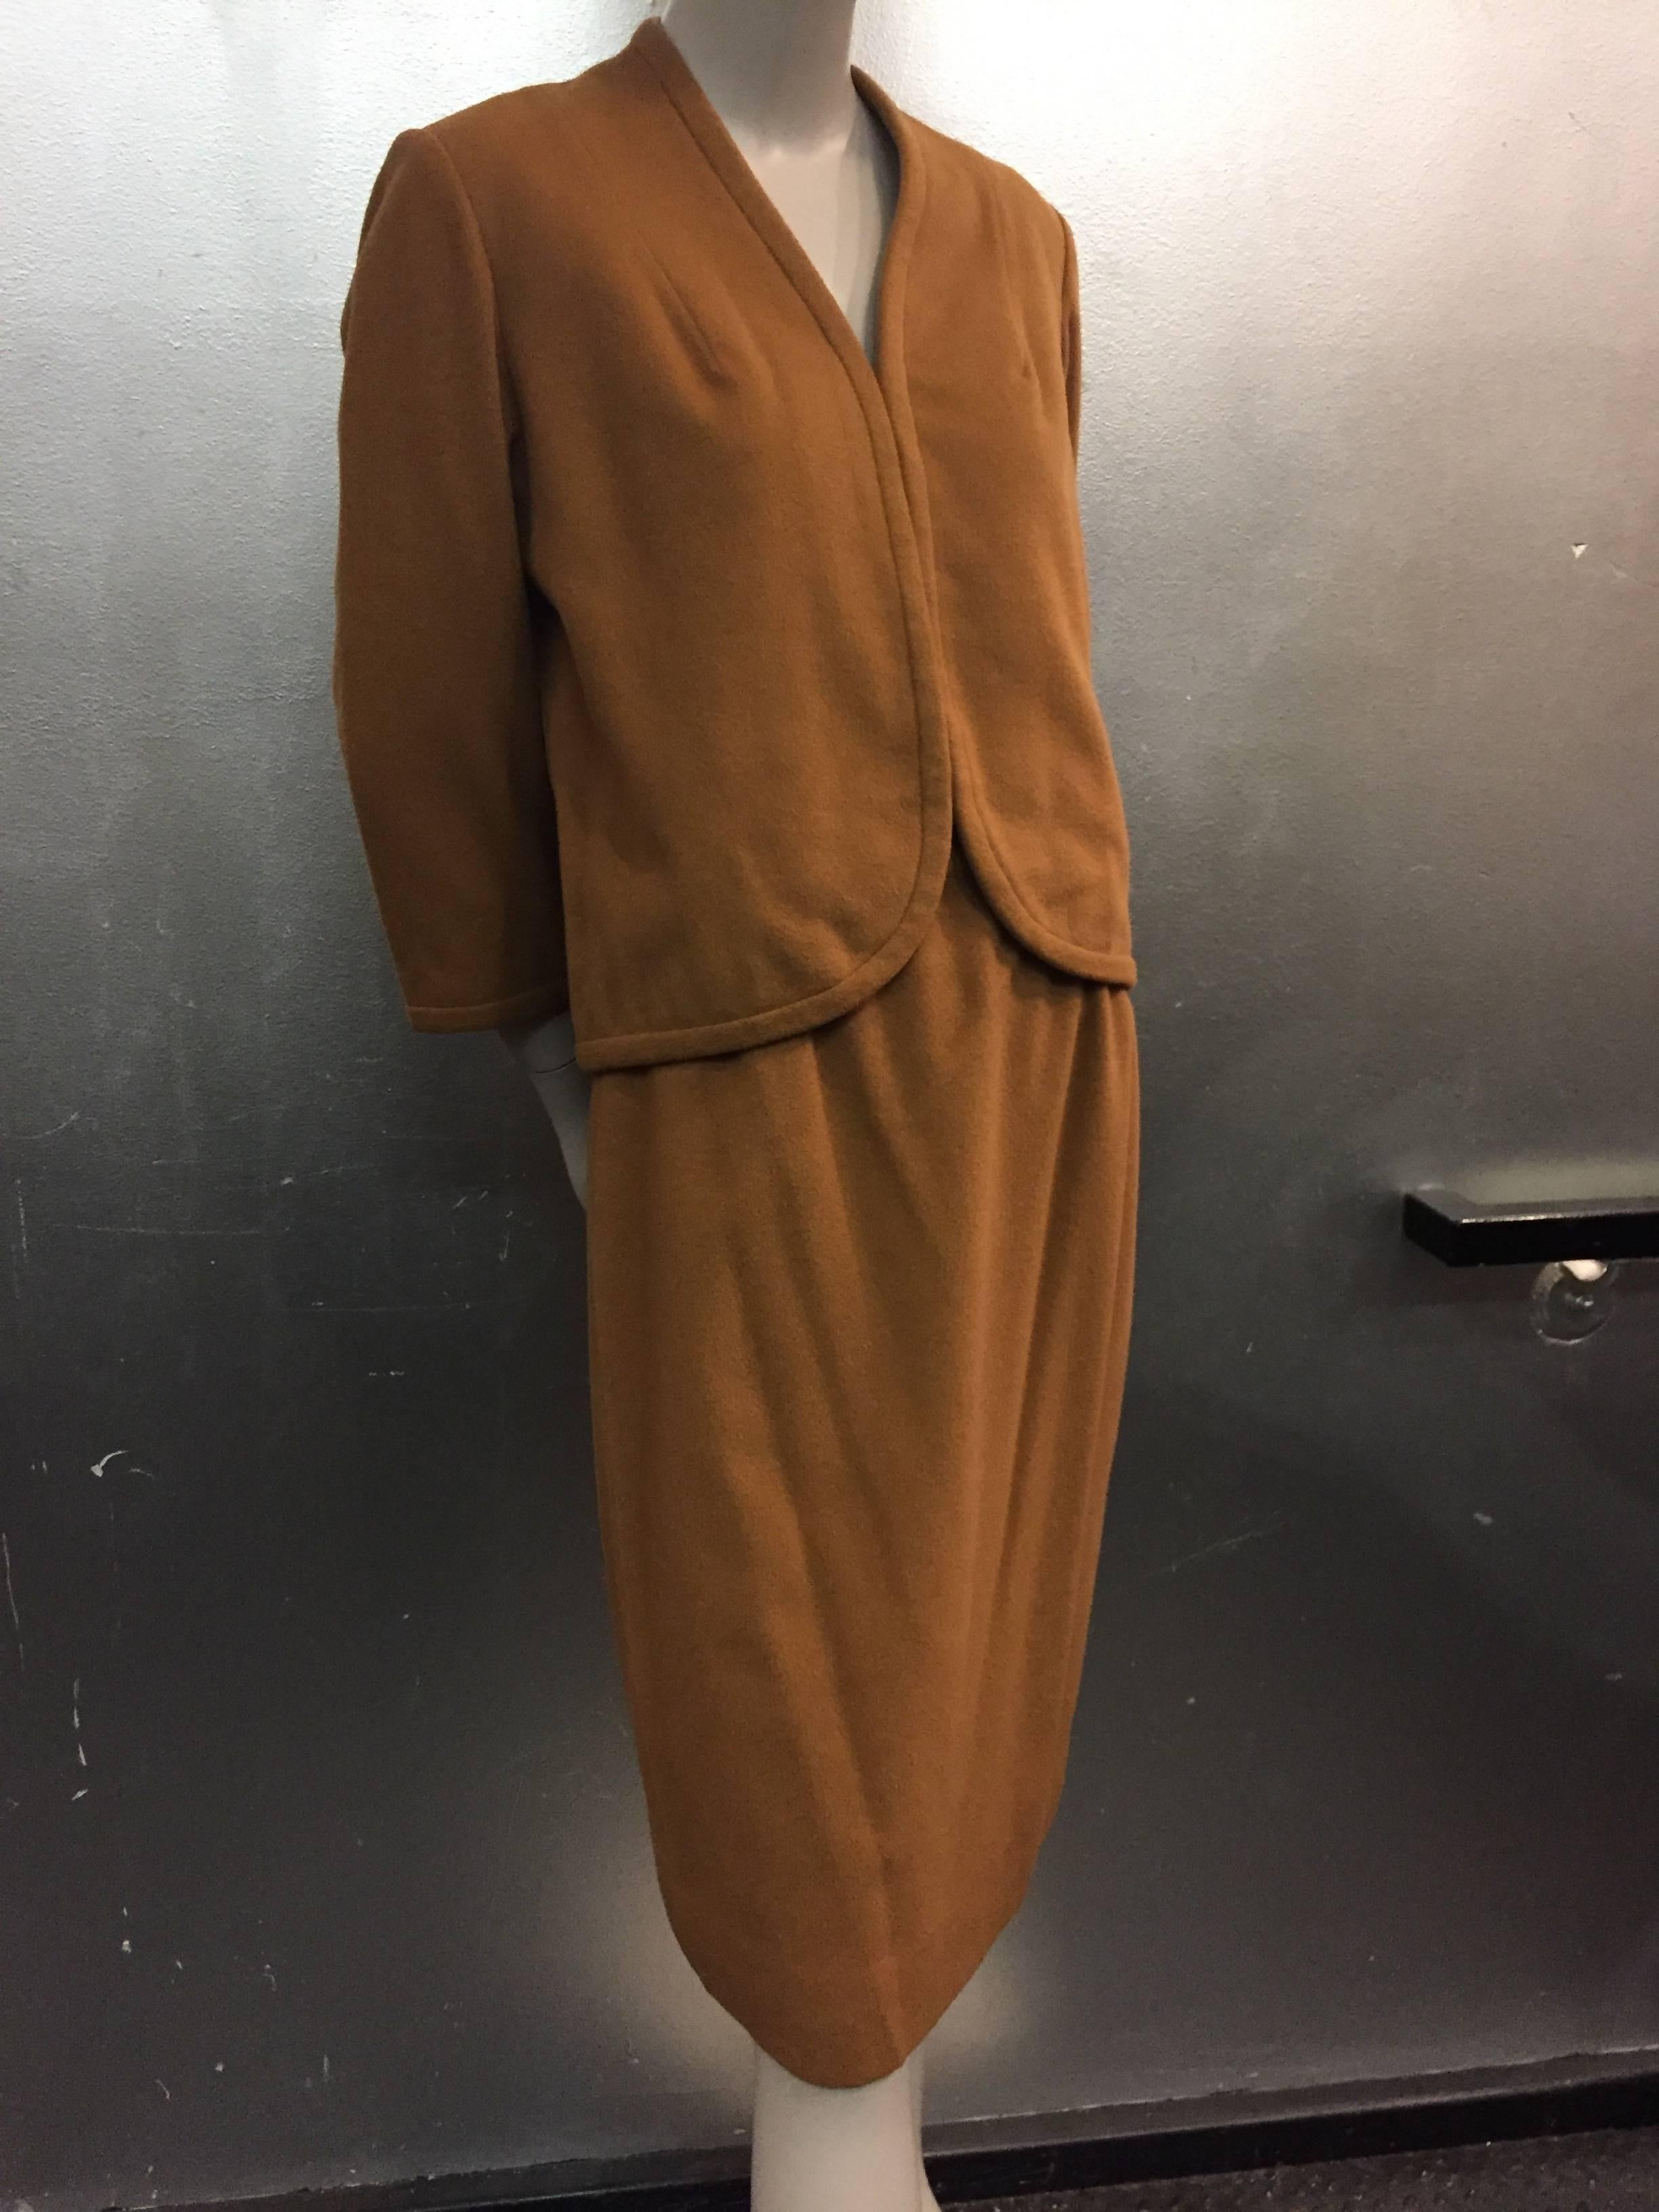 1960s Maison Mendessolle tobacco hued, luxurious vicuna textile, 3-piece skirt suit and coat ensemble.  All pieces are silk lined and beautifully tailored and constructed. Knee-length skirt.  Jacket has a beautiful curved hem with hidden hook and